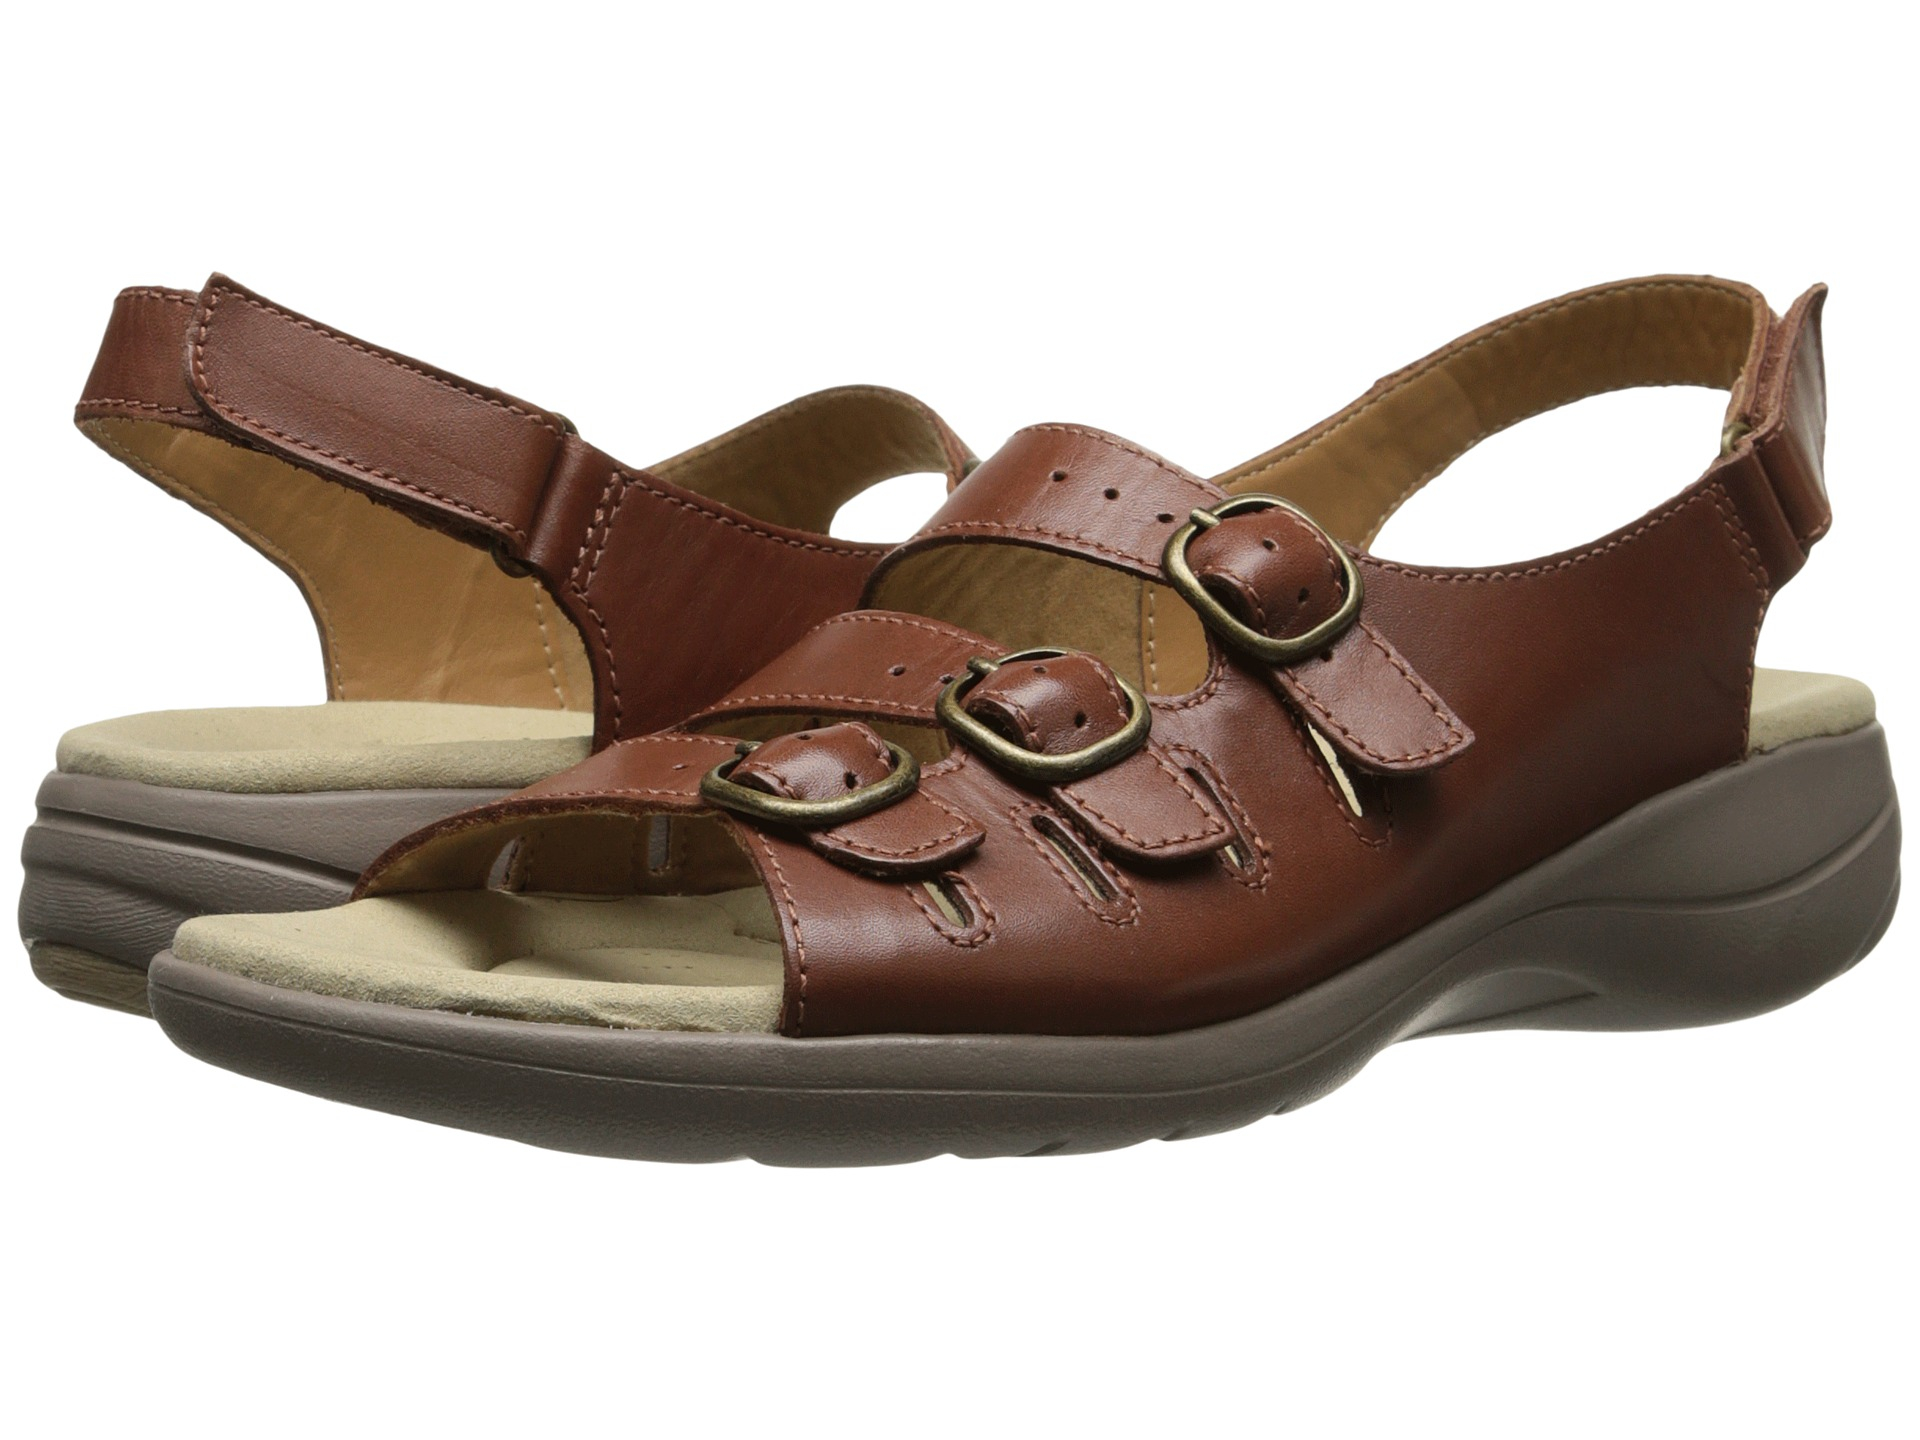 Clarks Saylie Medway in Tan Leather (Brown) - Lyst